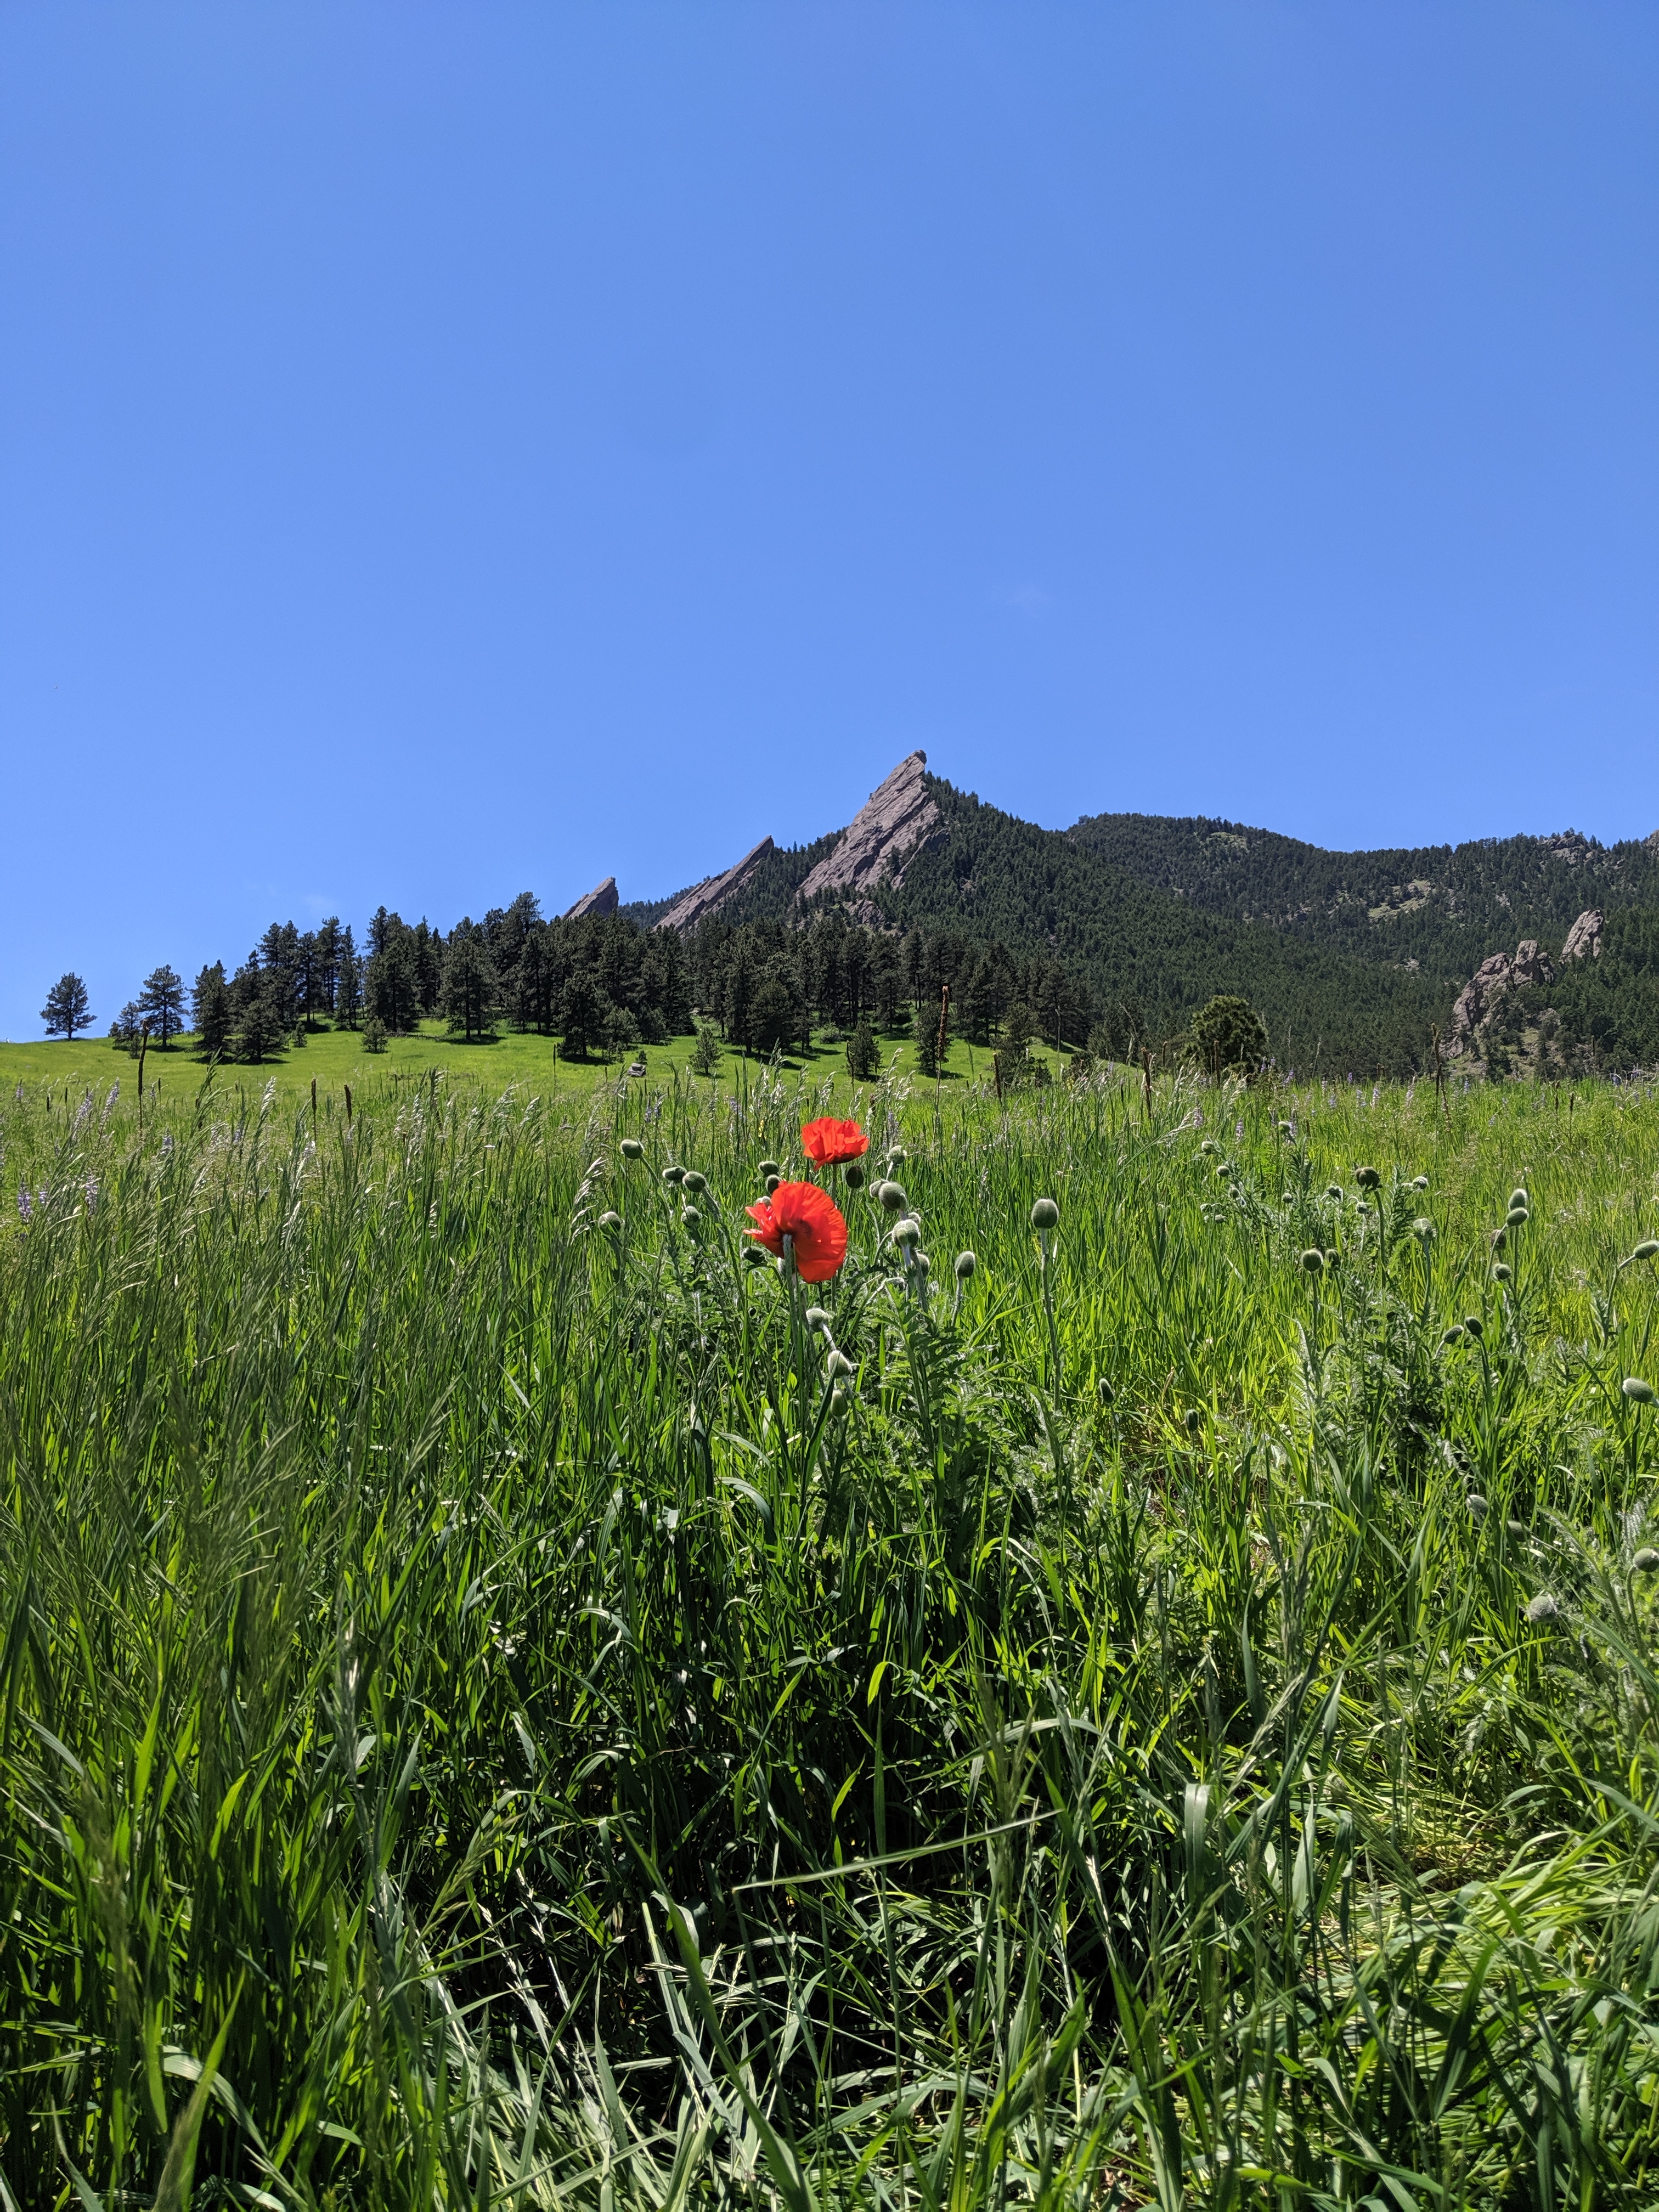 A red flower in front of the Colorado Chautauqua in Boulder, Colorado